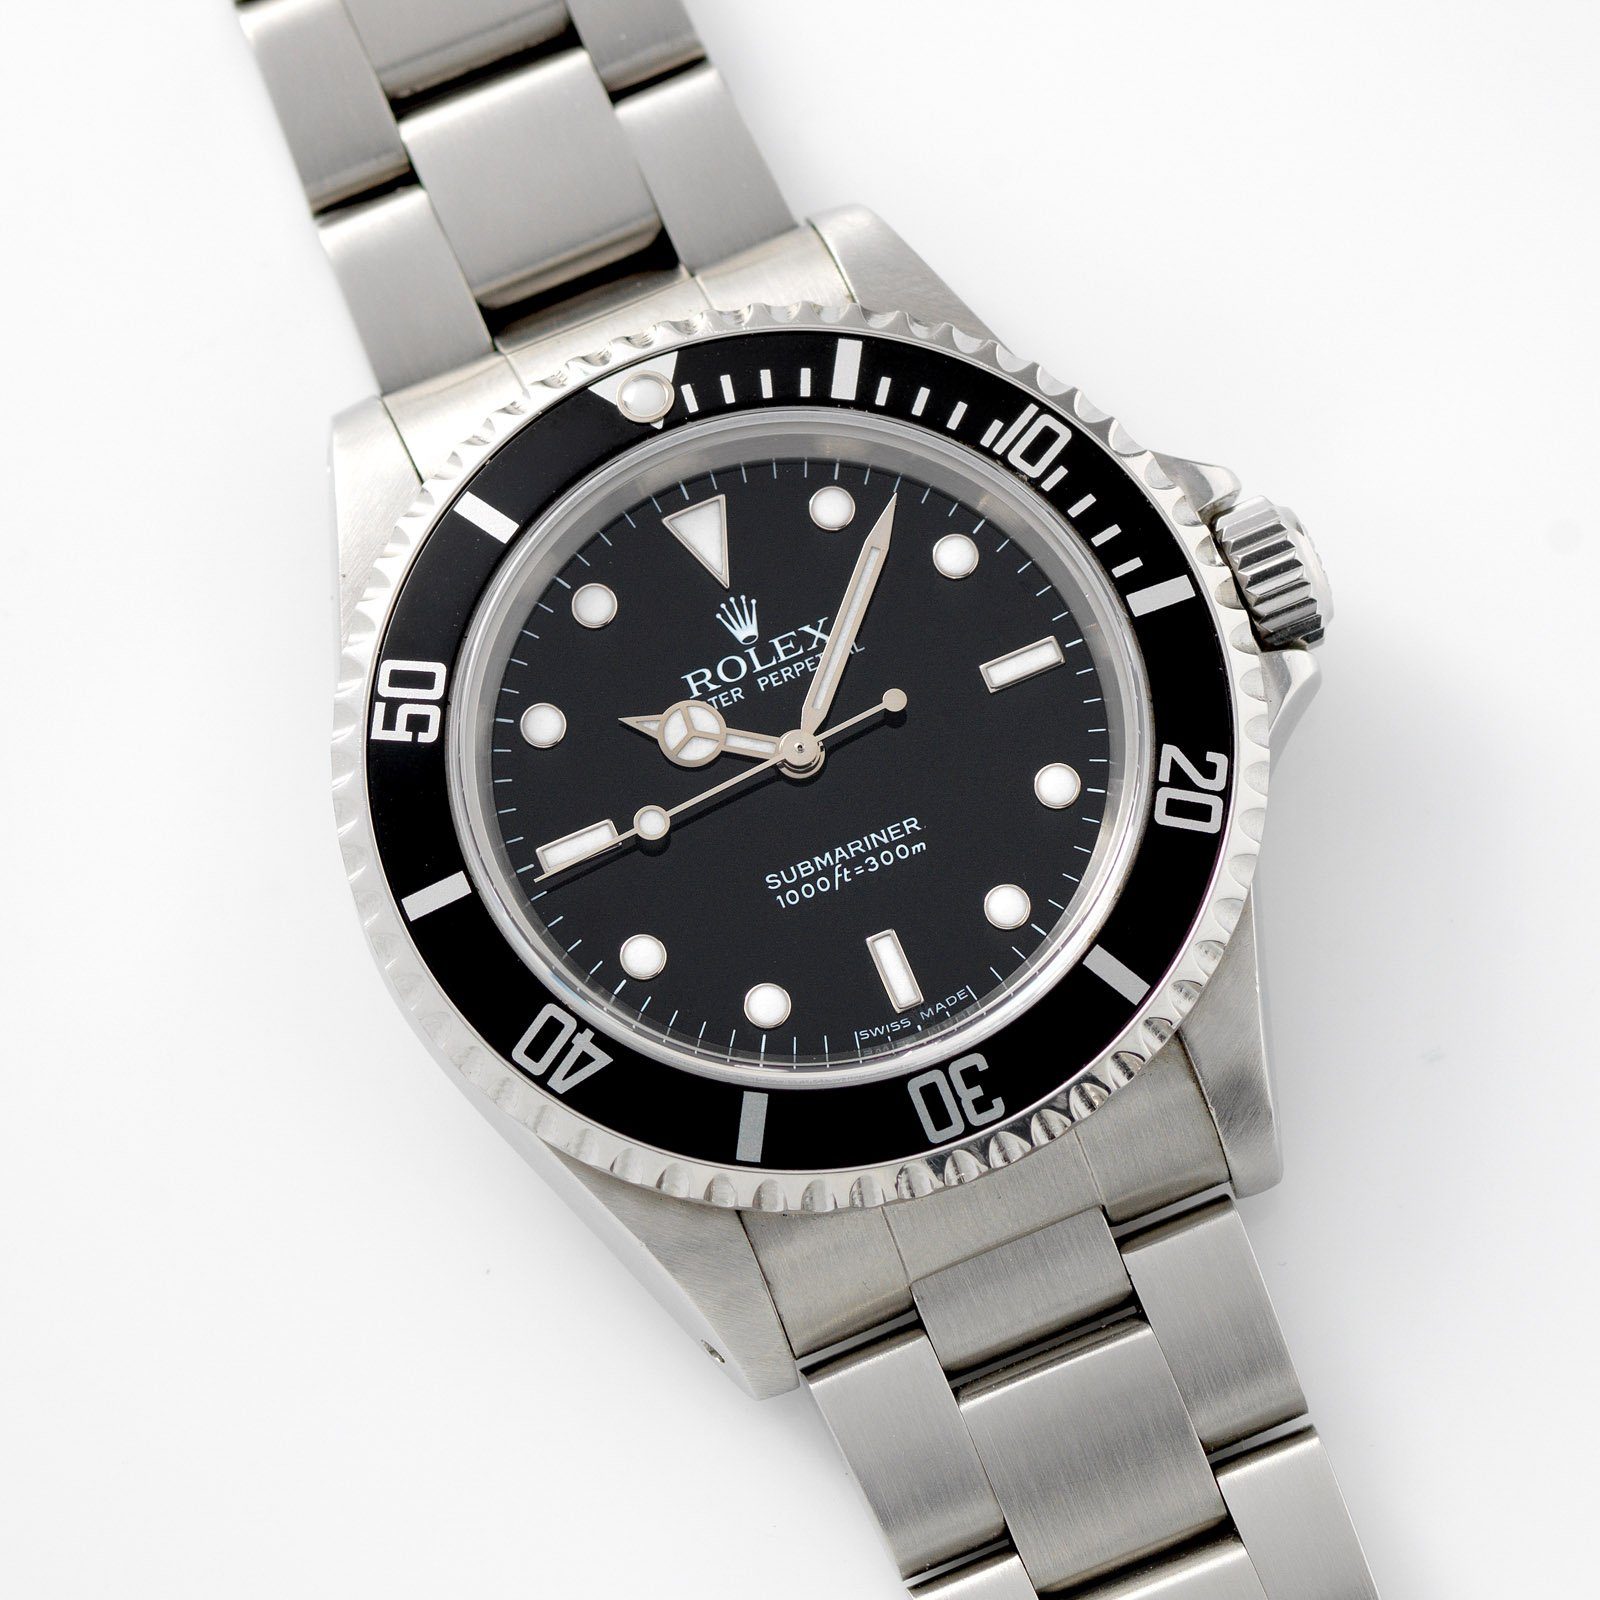 Rolex Submariner Two-Line Dial 14060M 